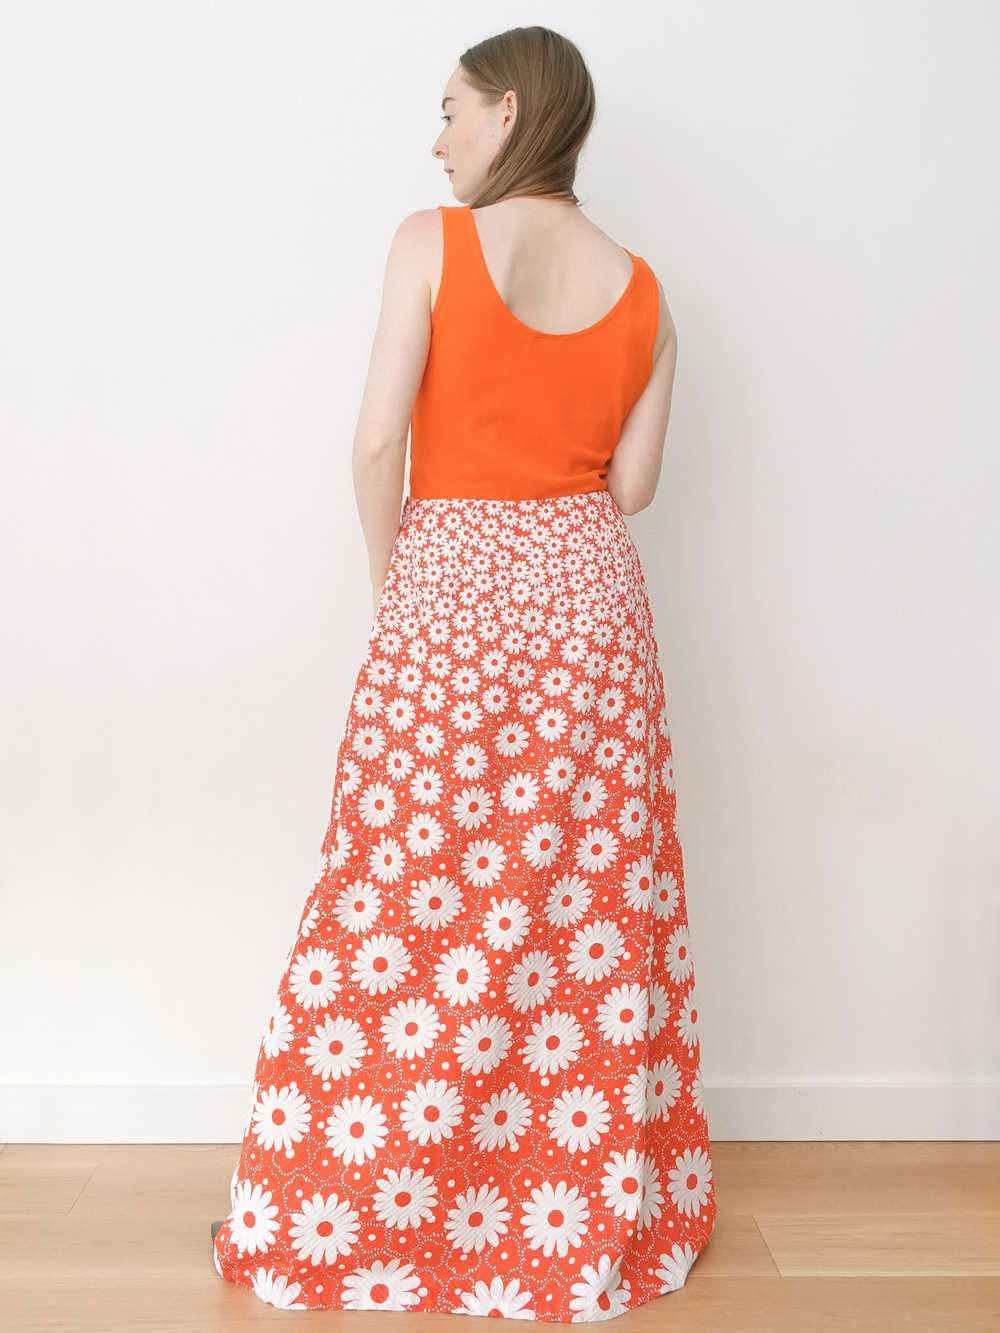 70s Red and White Daisy Print Maxi Skirt - image 3